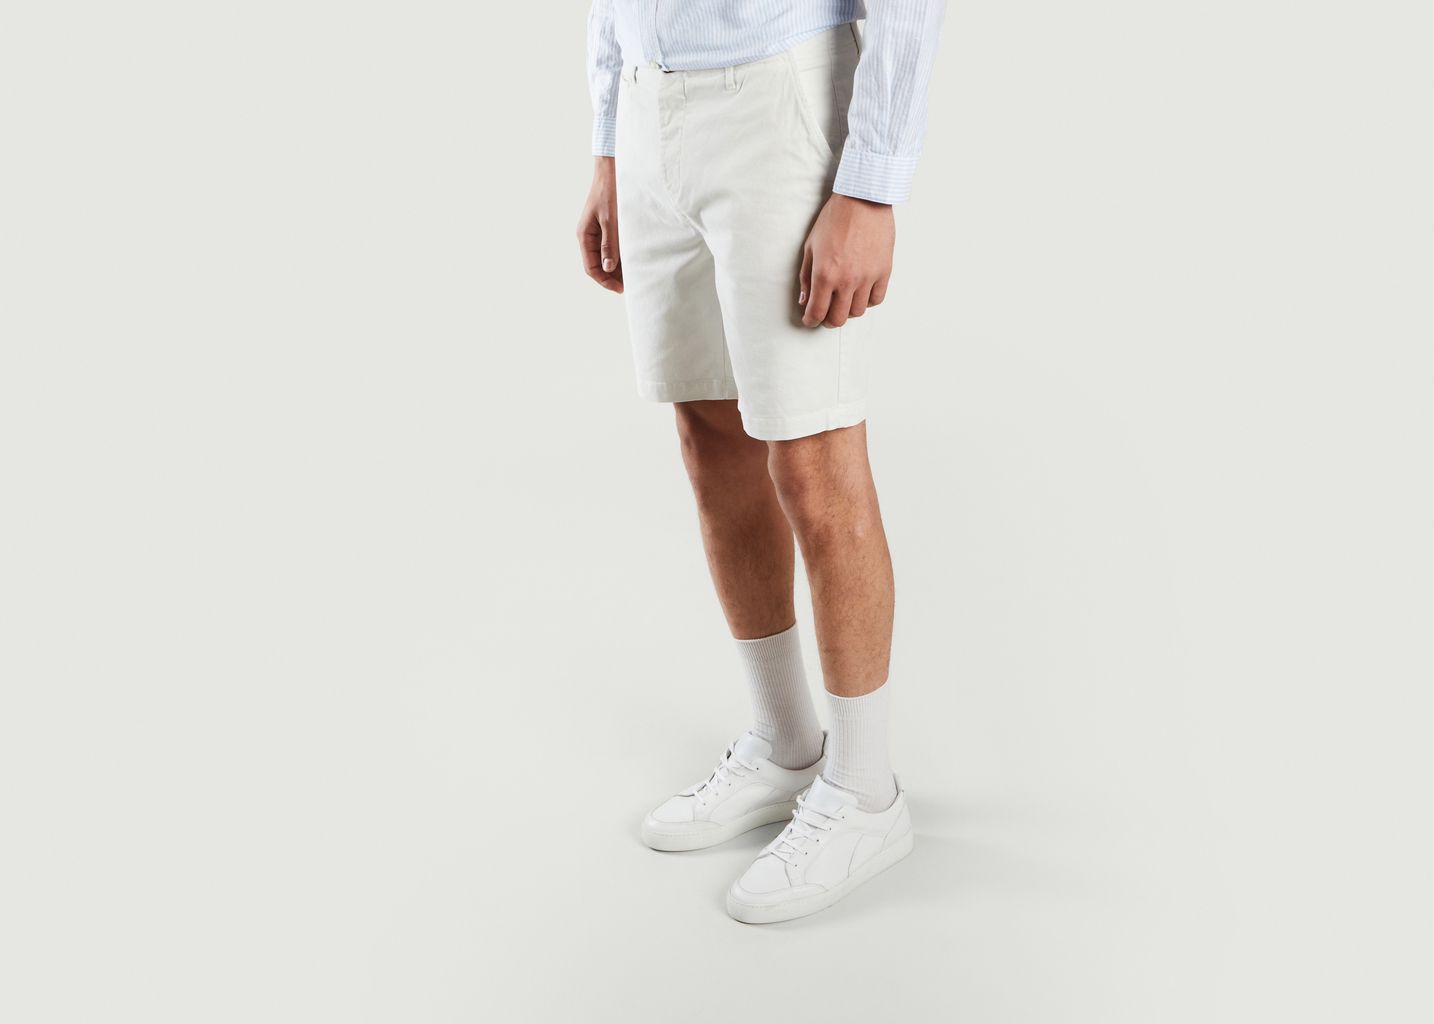 Chino Shorts - Cuisse de Grenouille